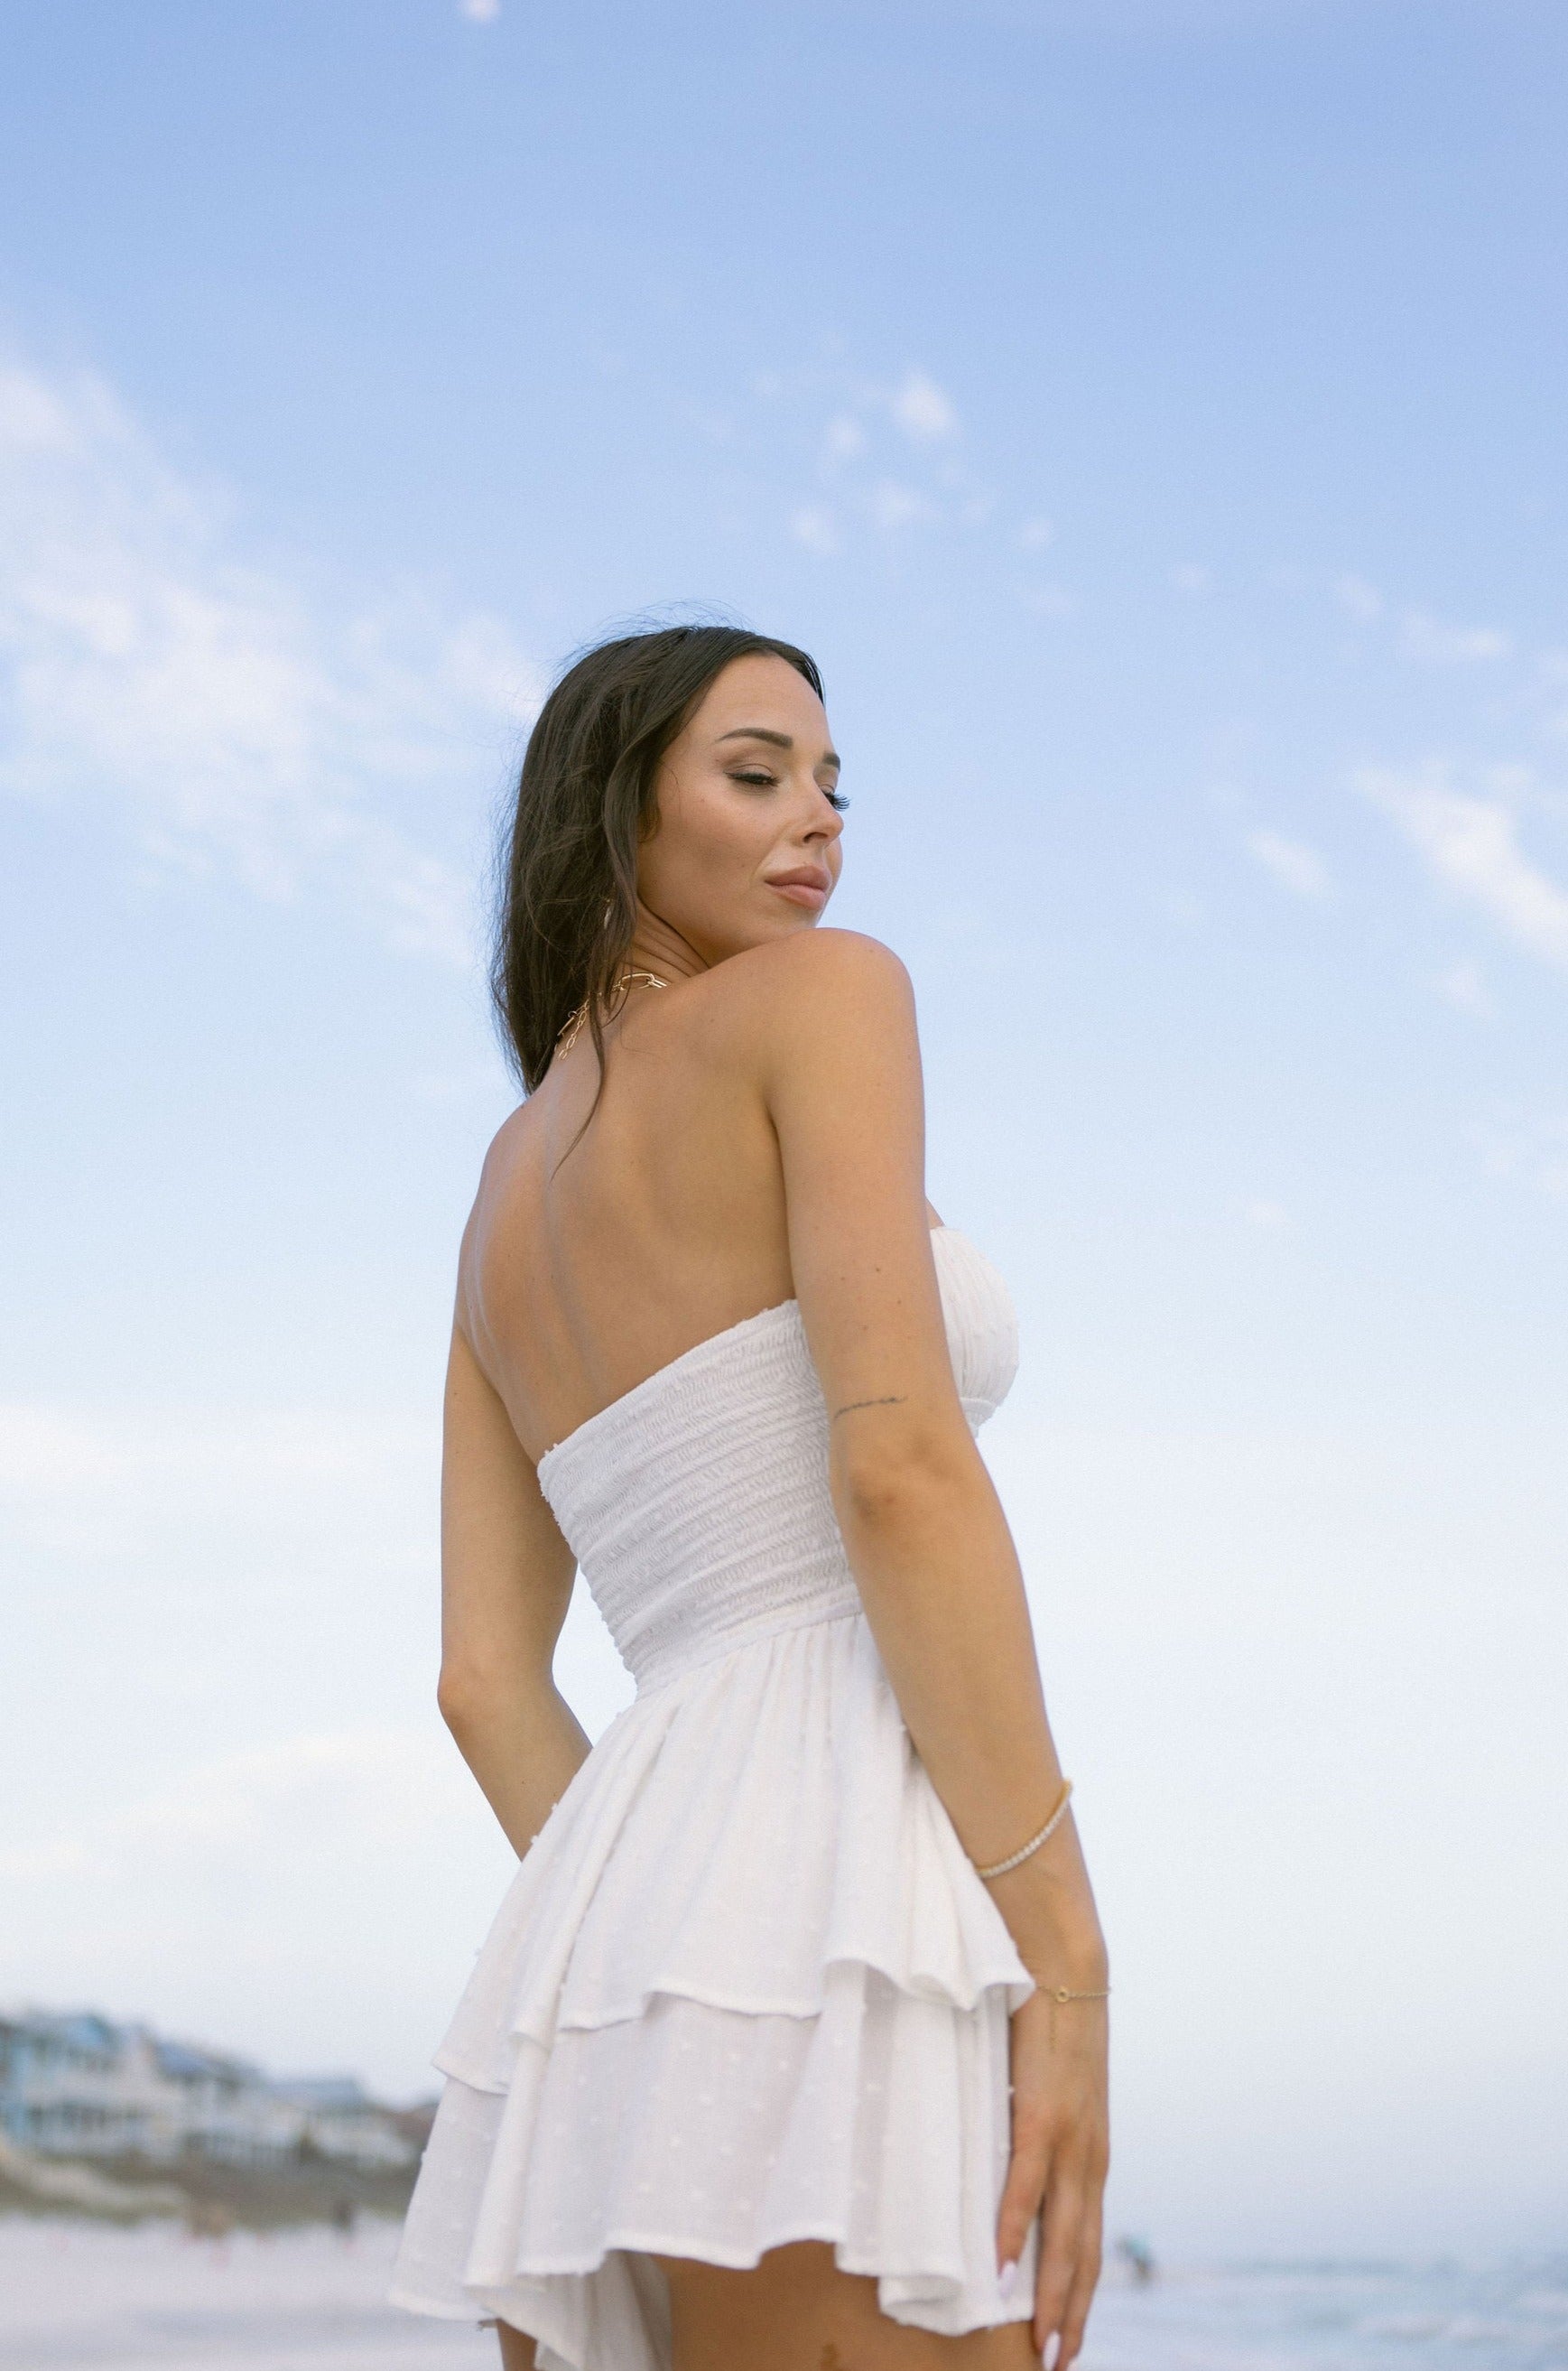 Upper body side view of female model wearing the Jemma White Swiss Dot Romper that has white swiss dot fabric, a strapless neck, and tiered shorts.